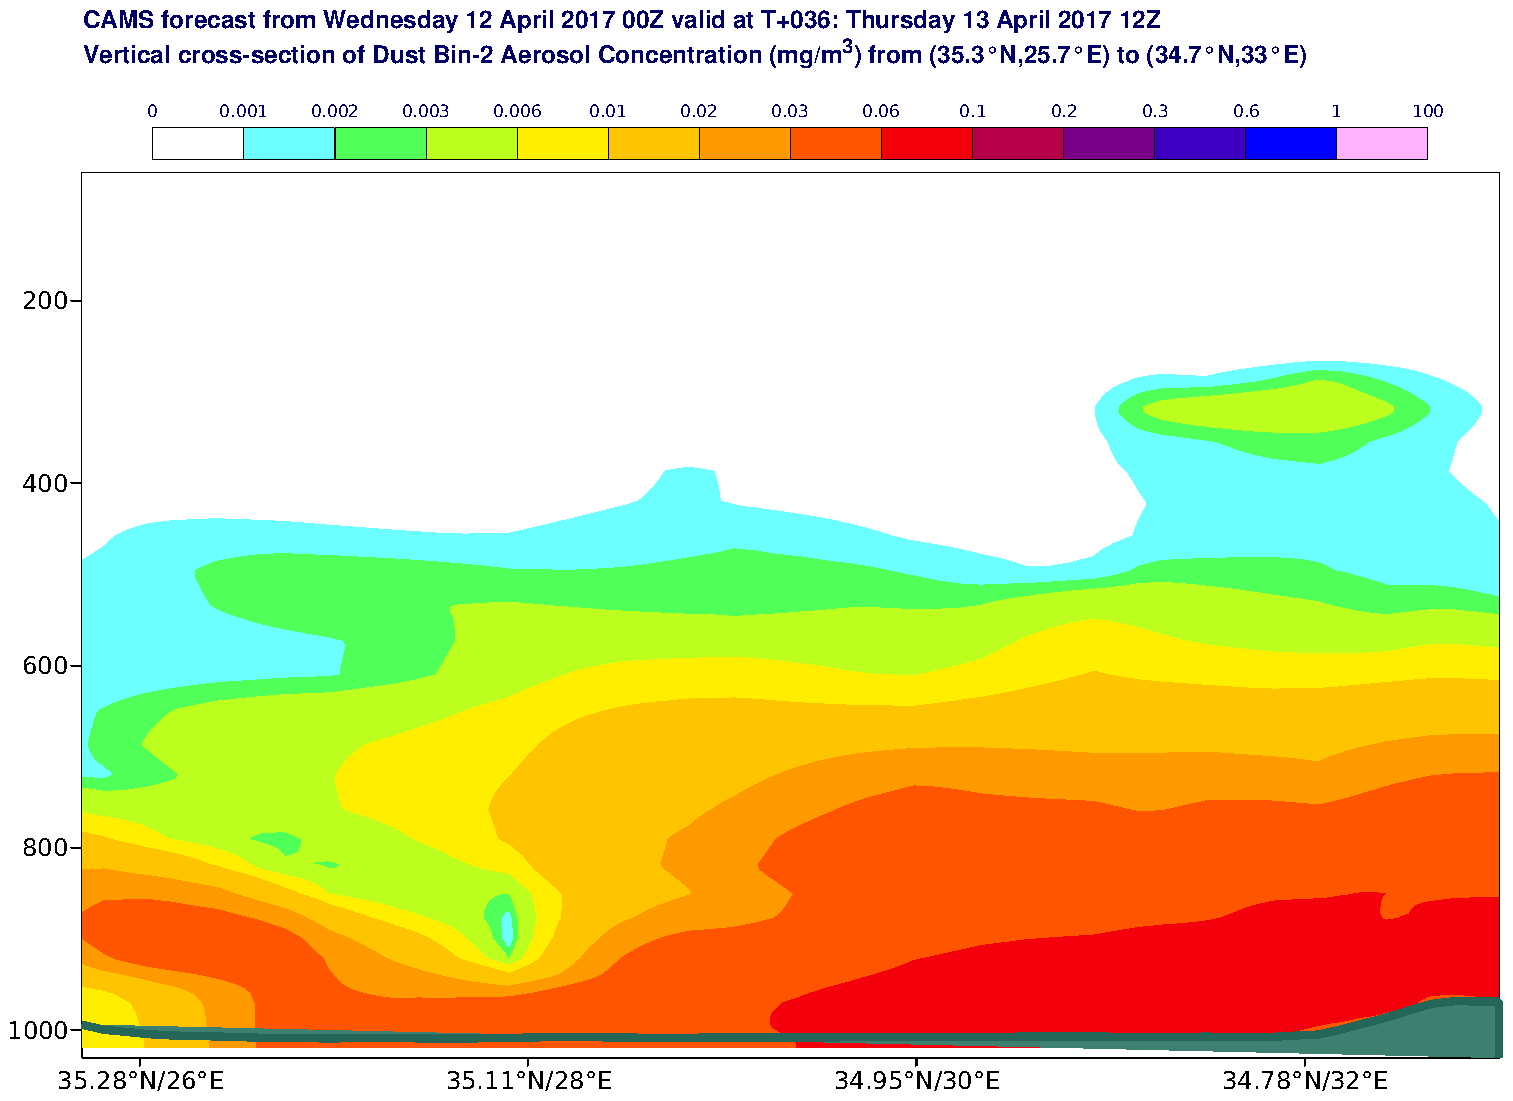 Vertical cross-section of Dust Bin-2 Aerosol Concentration (mg/m3) valid at T36 - 2017-04-13 12:00